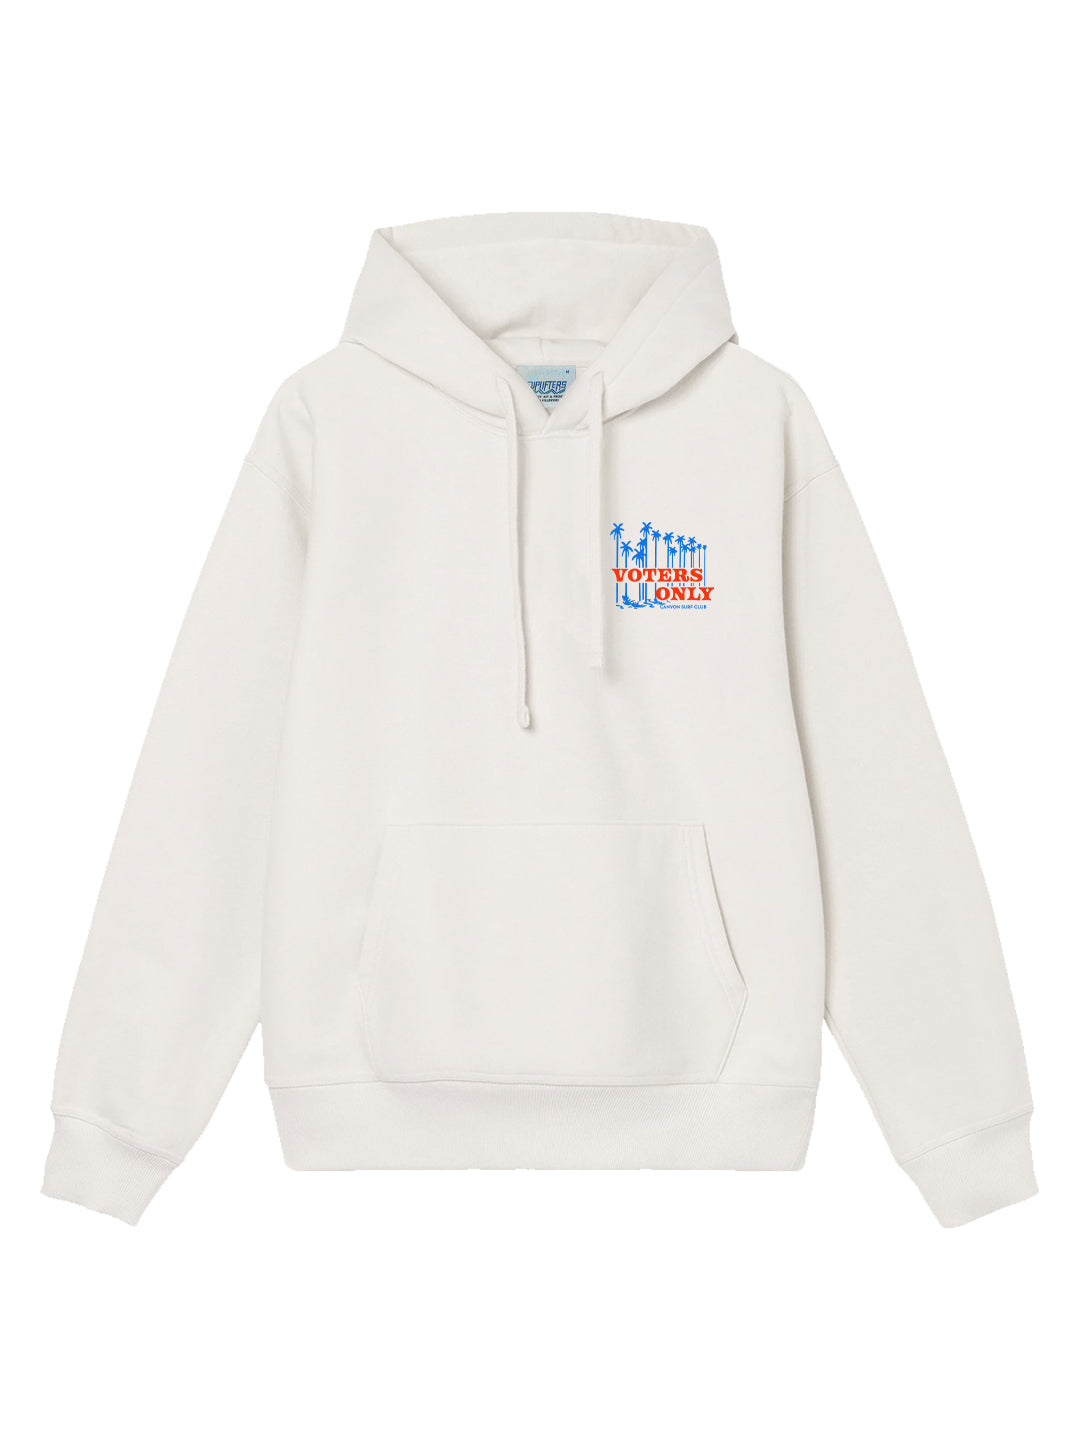 Voters Only Hoodie